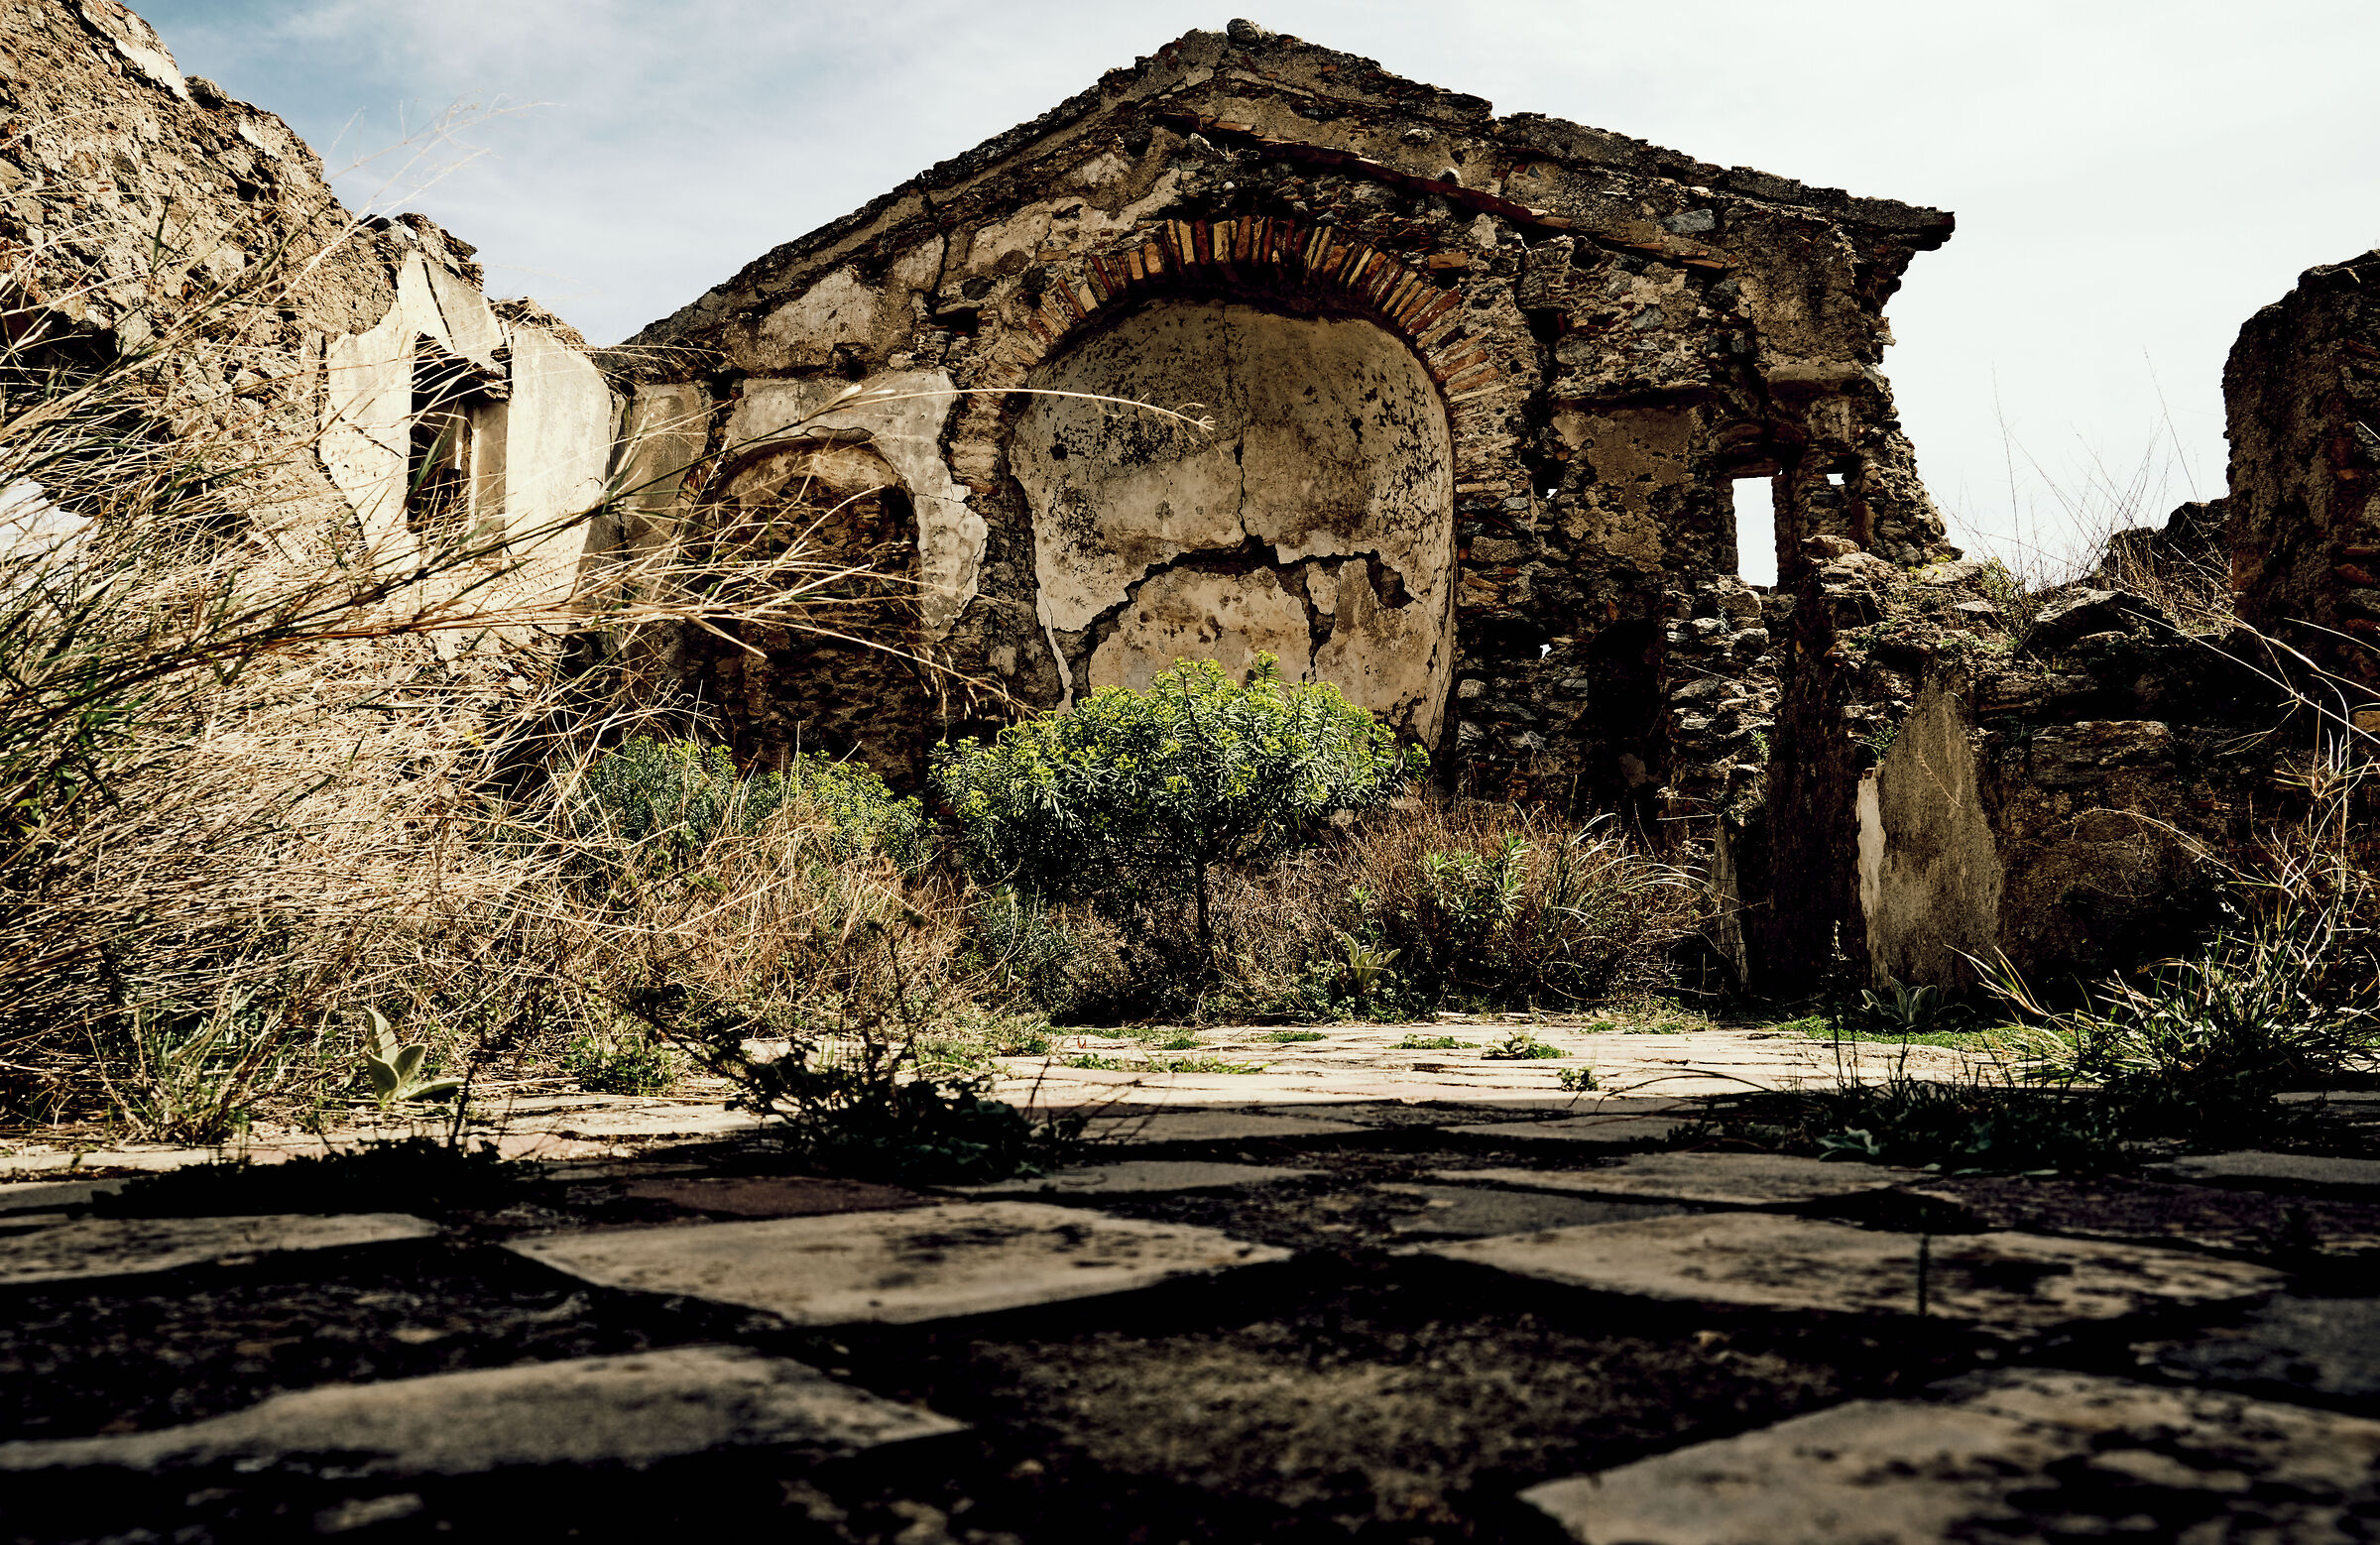 The castle of Amendolea and its abandonment ...